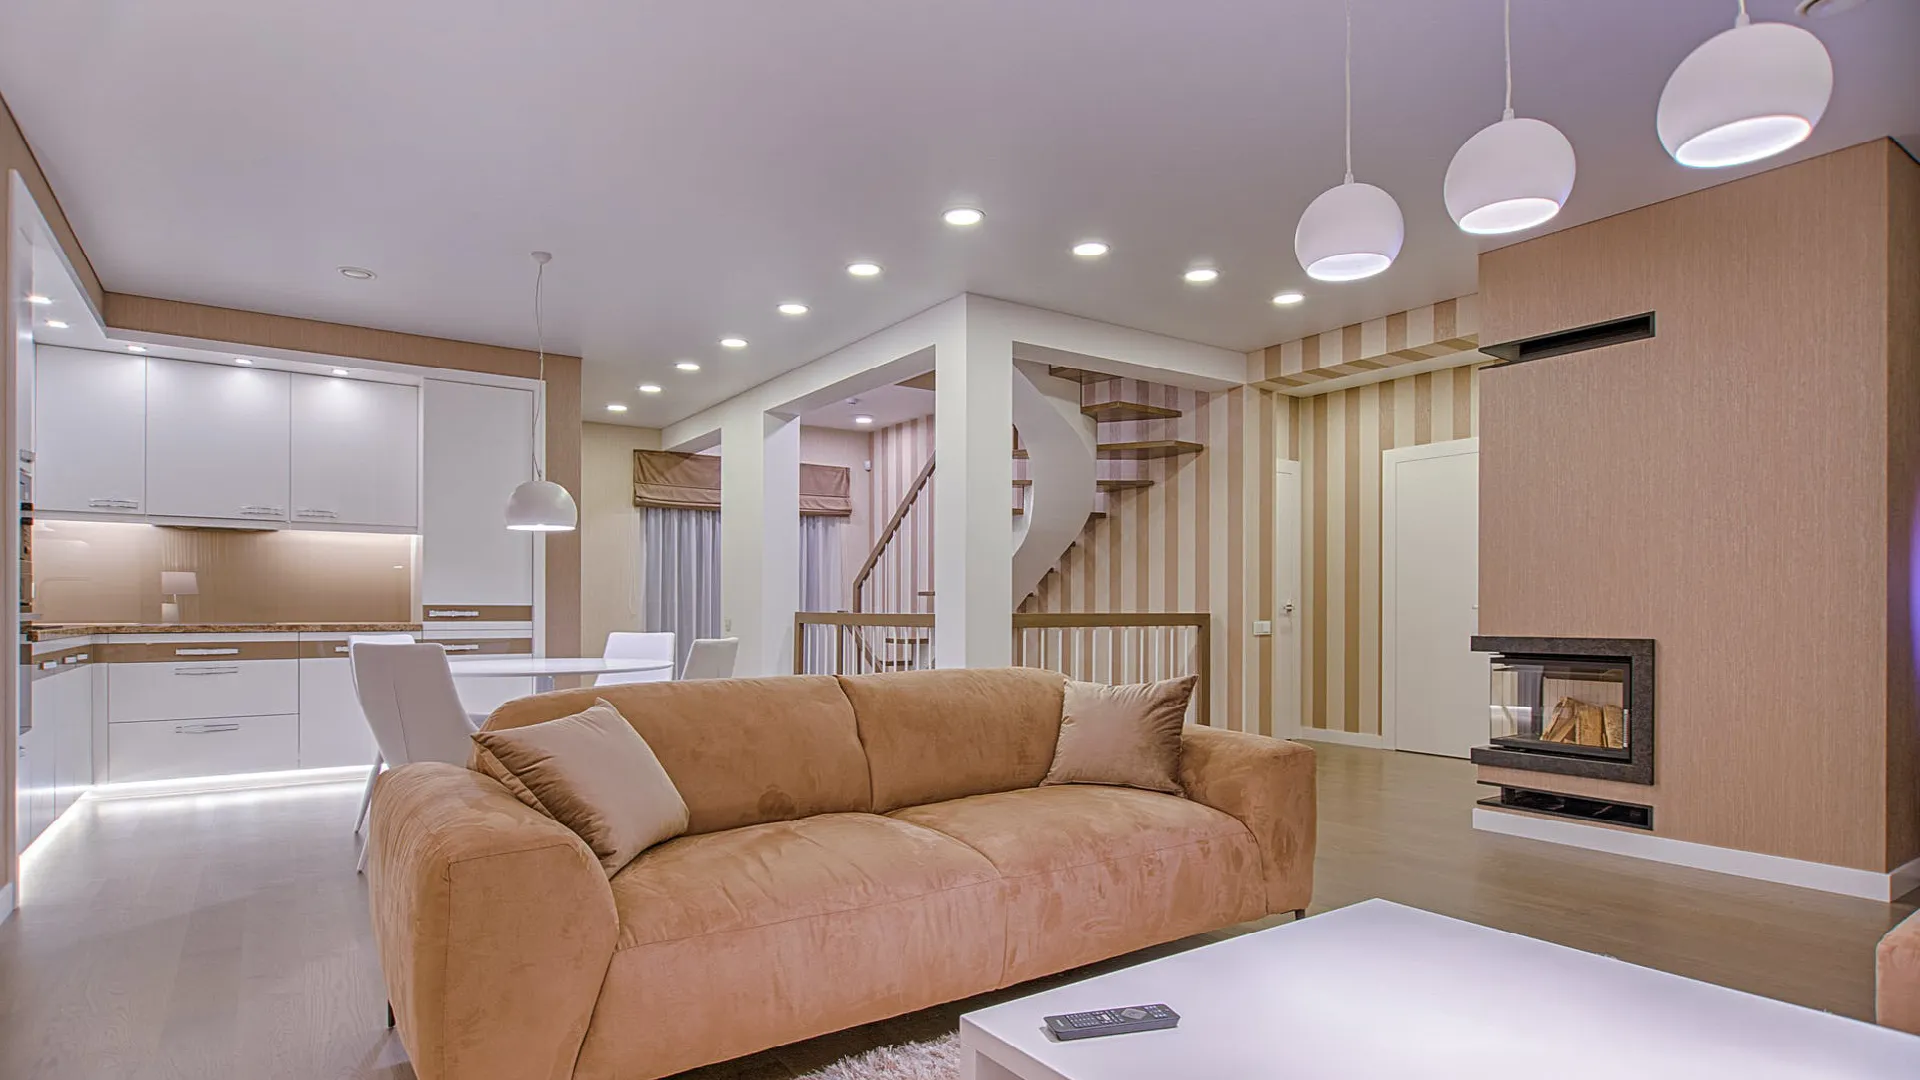 Illuminating with Care: Choosing the Best LED Lights for Eyes, Skin, and Your Living Spaces